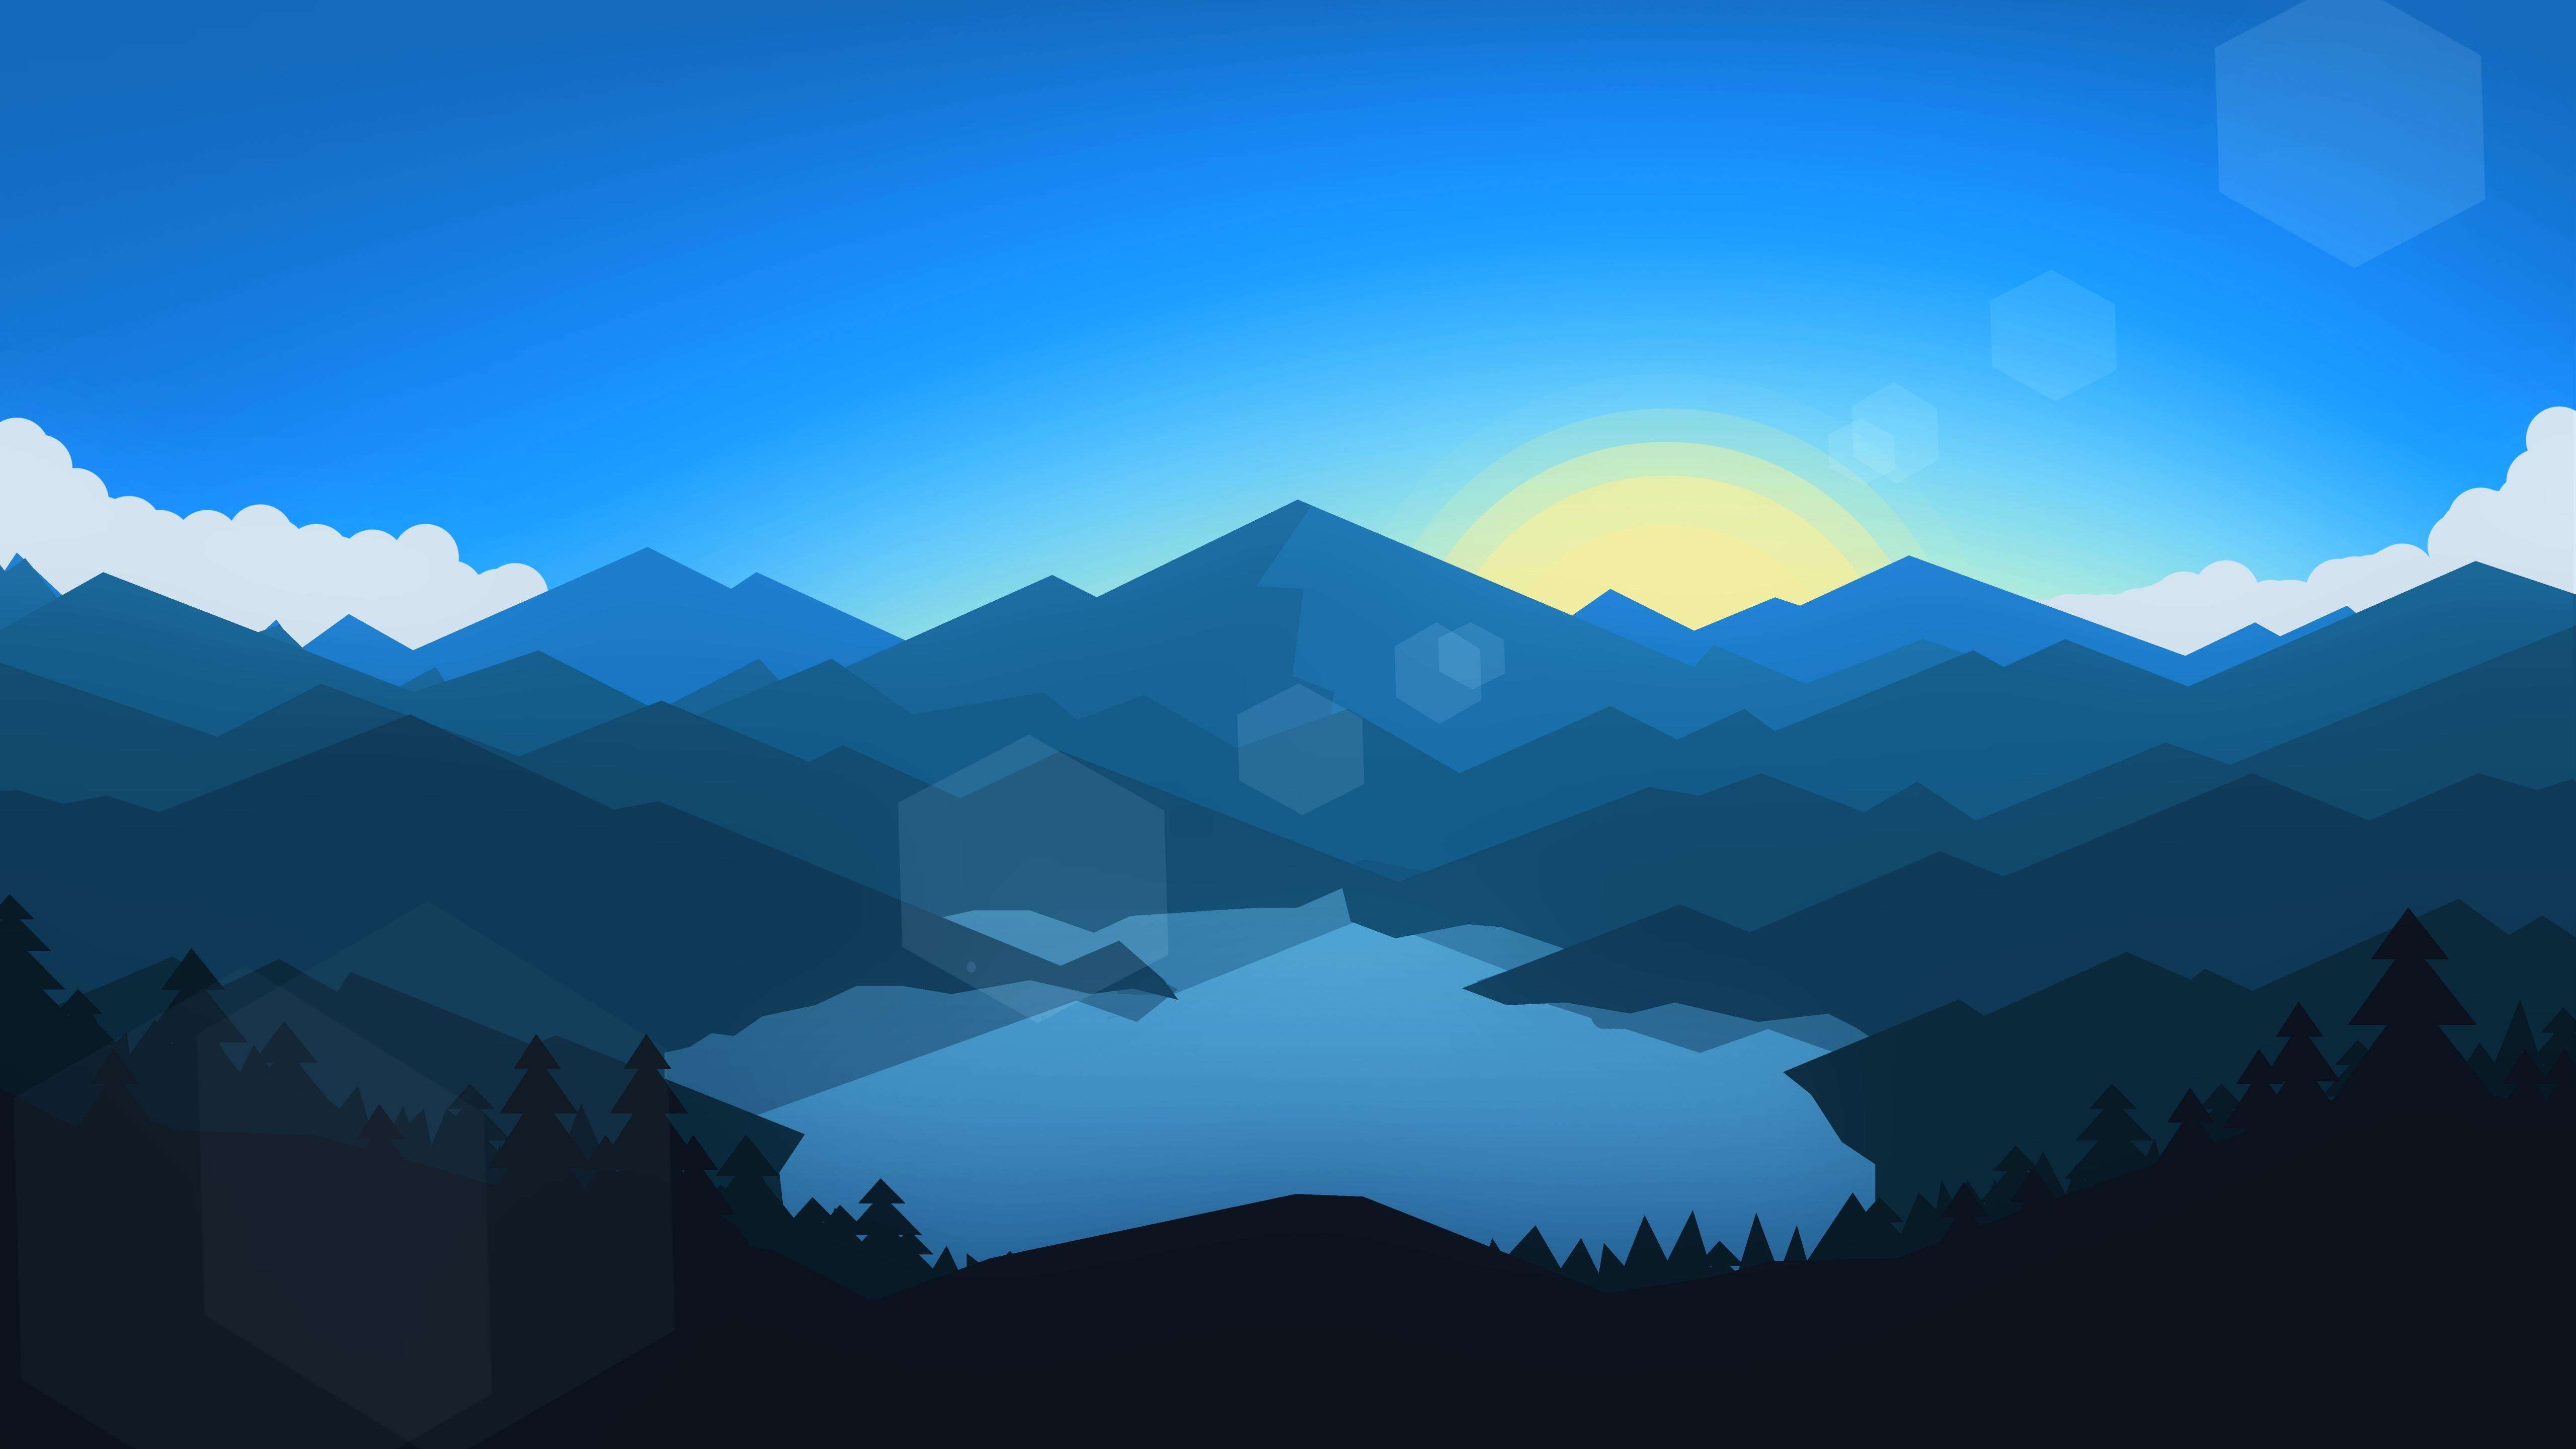 Download 5120x2880 wallpaper forest, mountains, sunset, cool weather